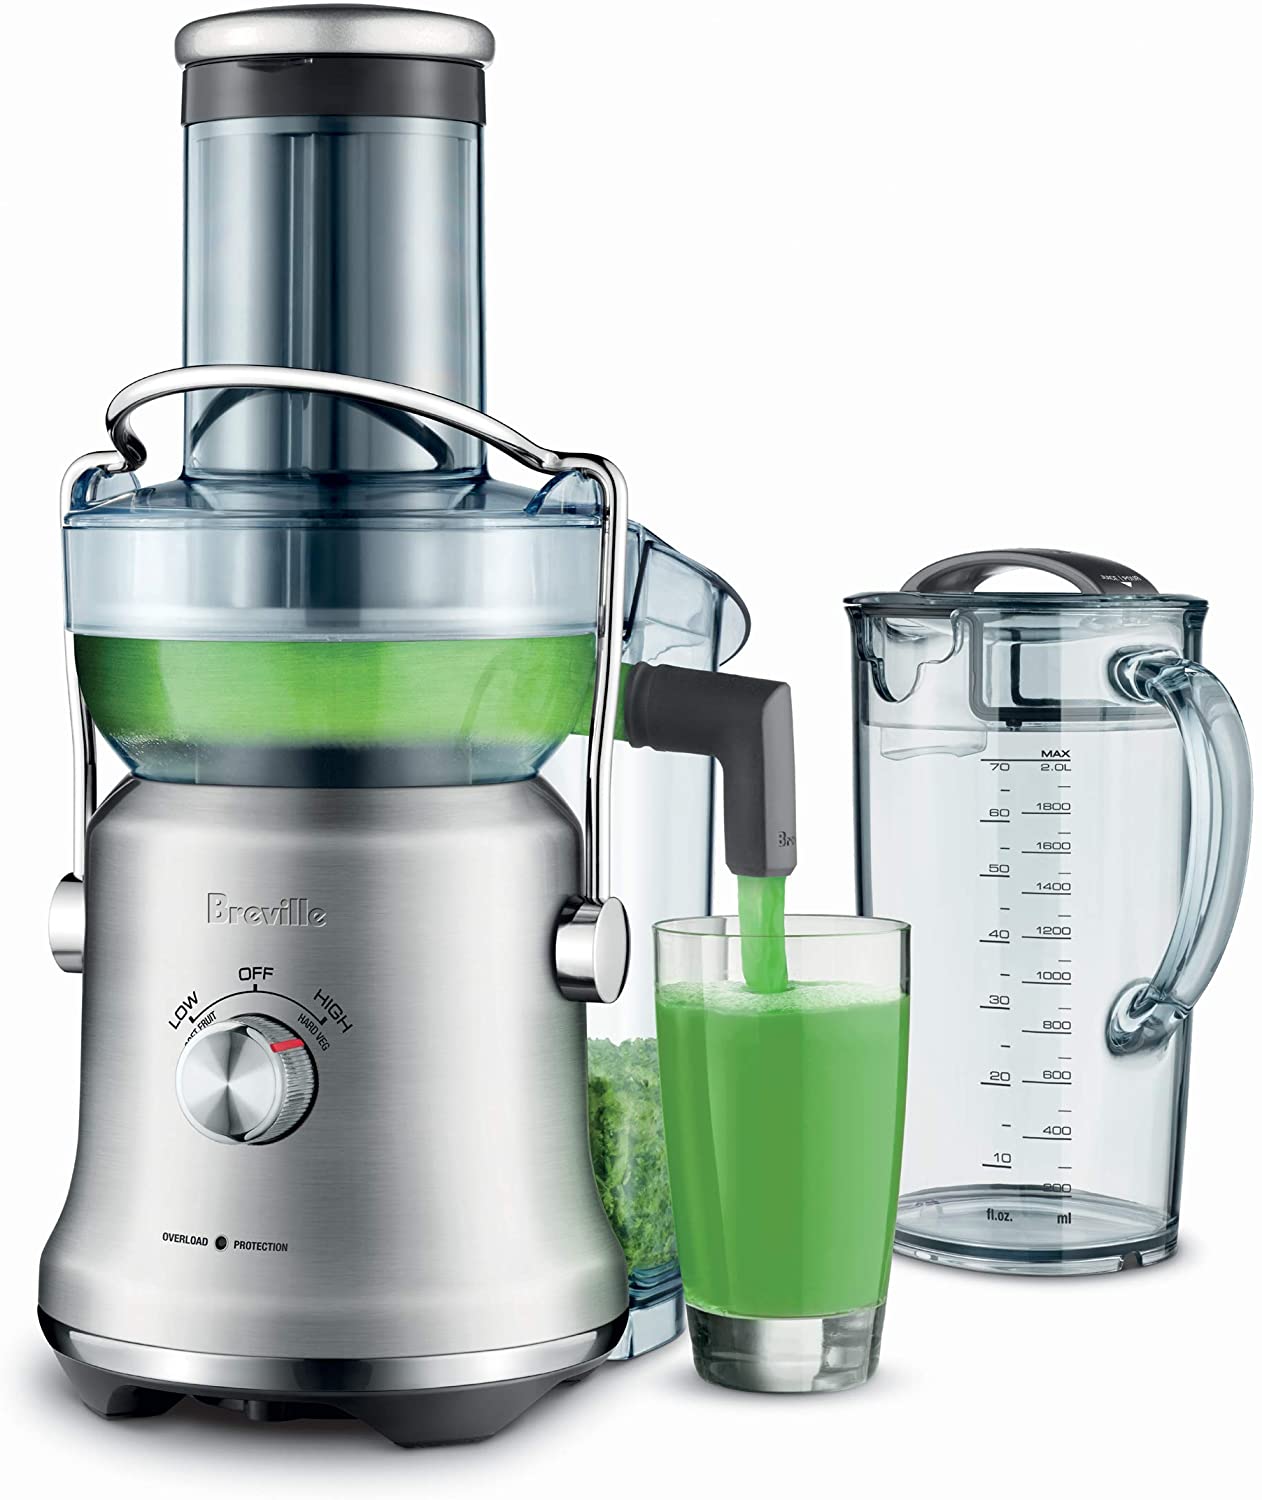 Breville BJE530BSS1BUS1 Countertop Centrifugal Juicer [Review ...